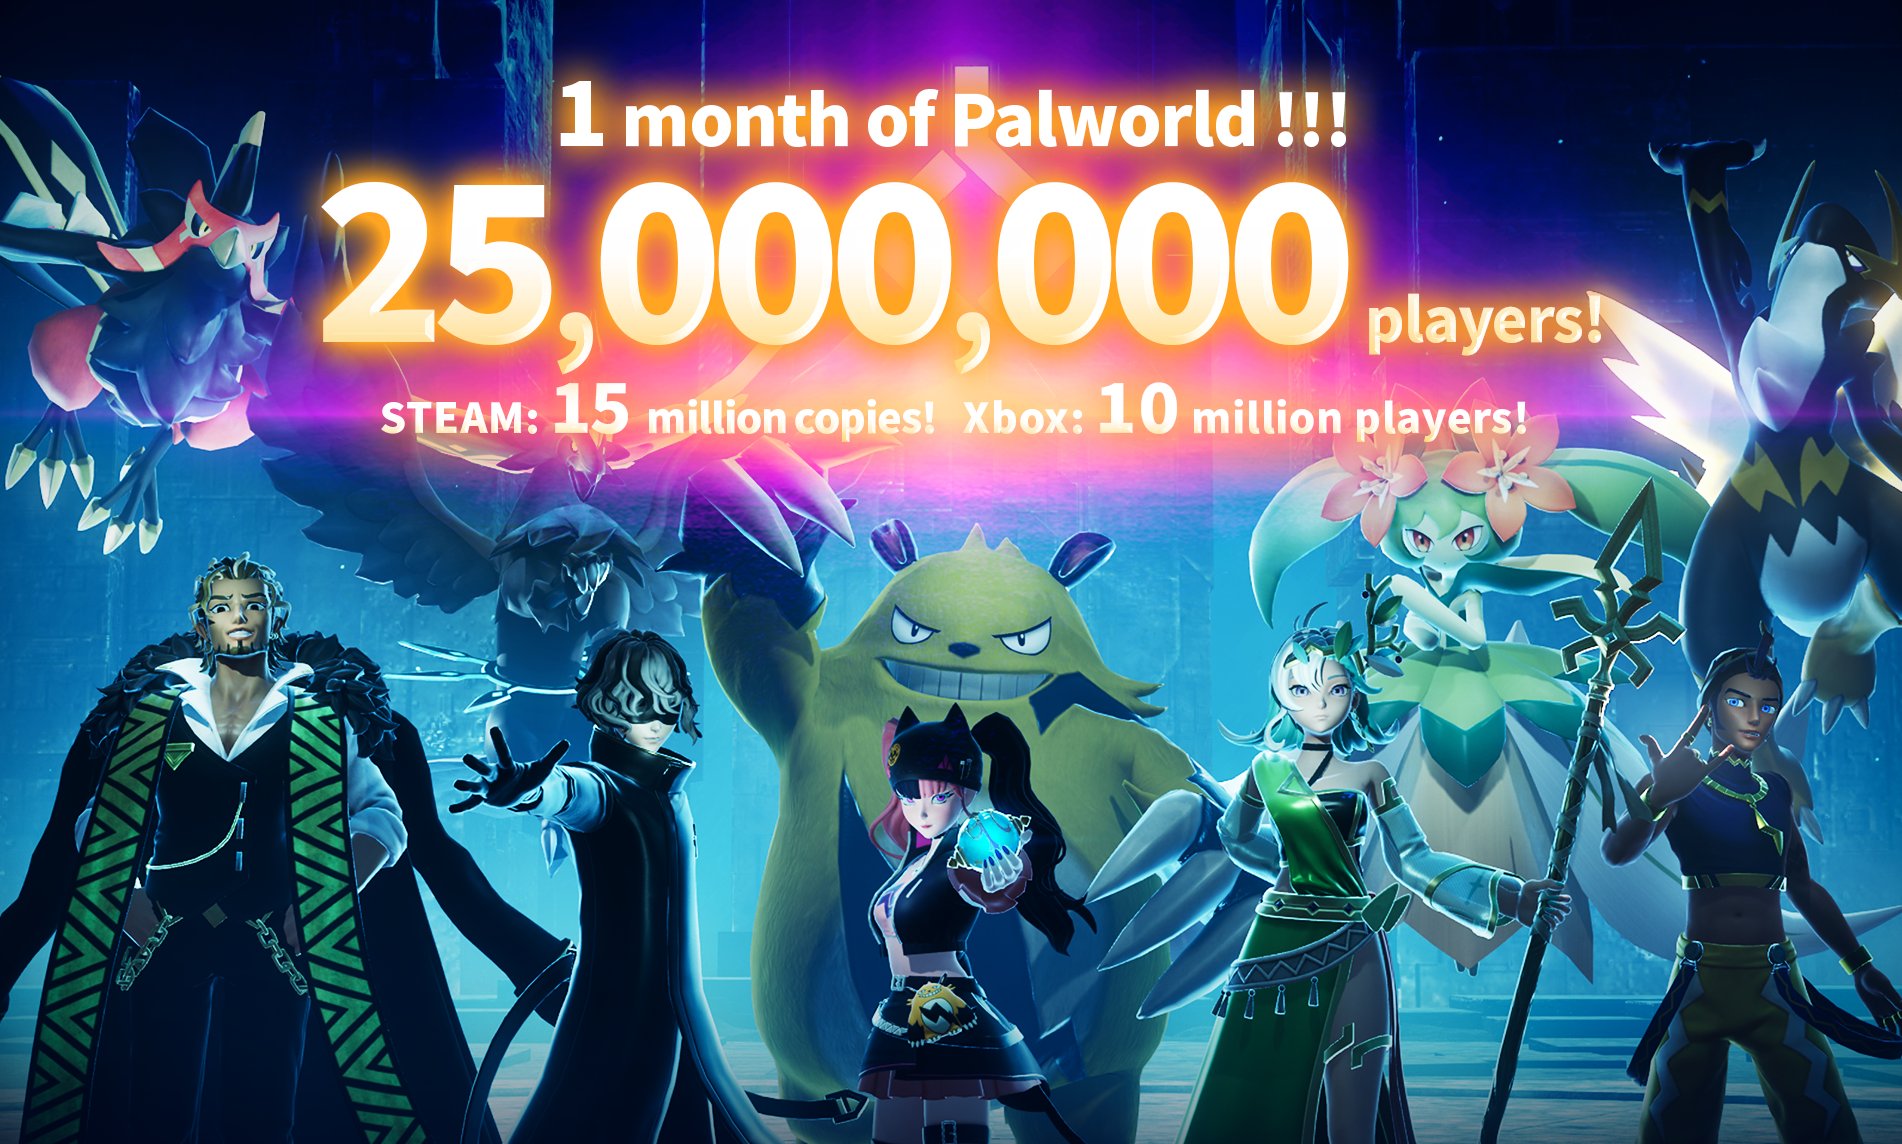 Palworld Hits 25 Million Players In First Month, Gets Custom Console And Controllers